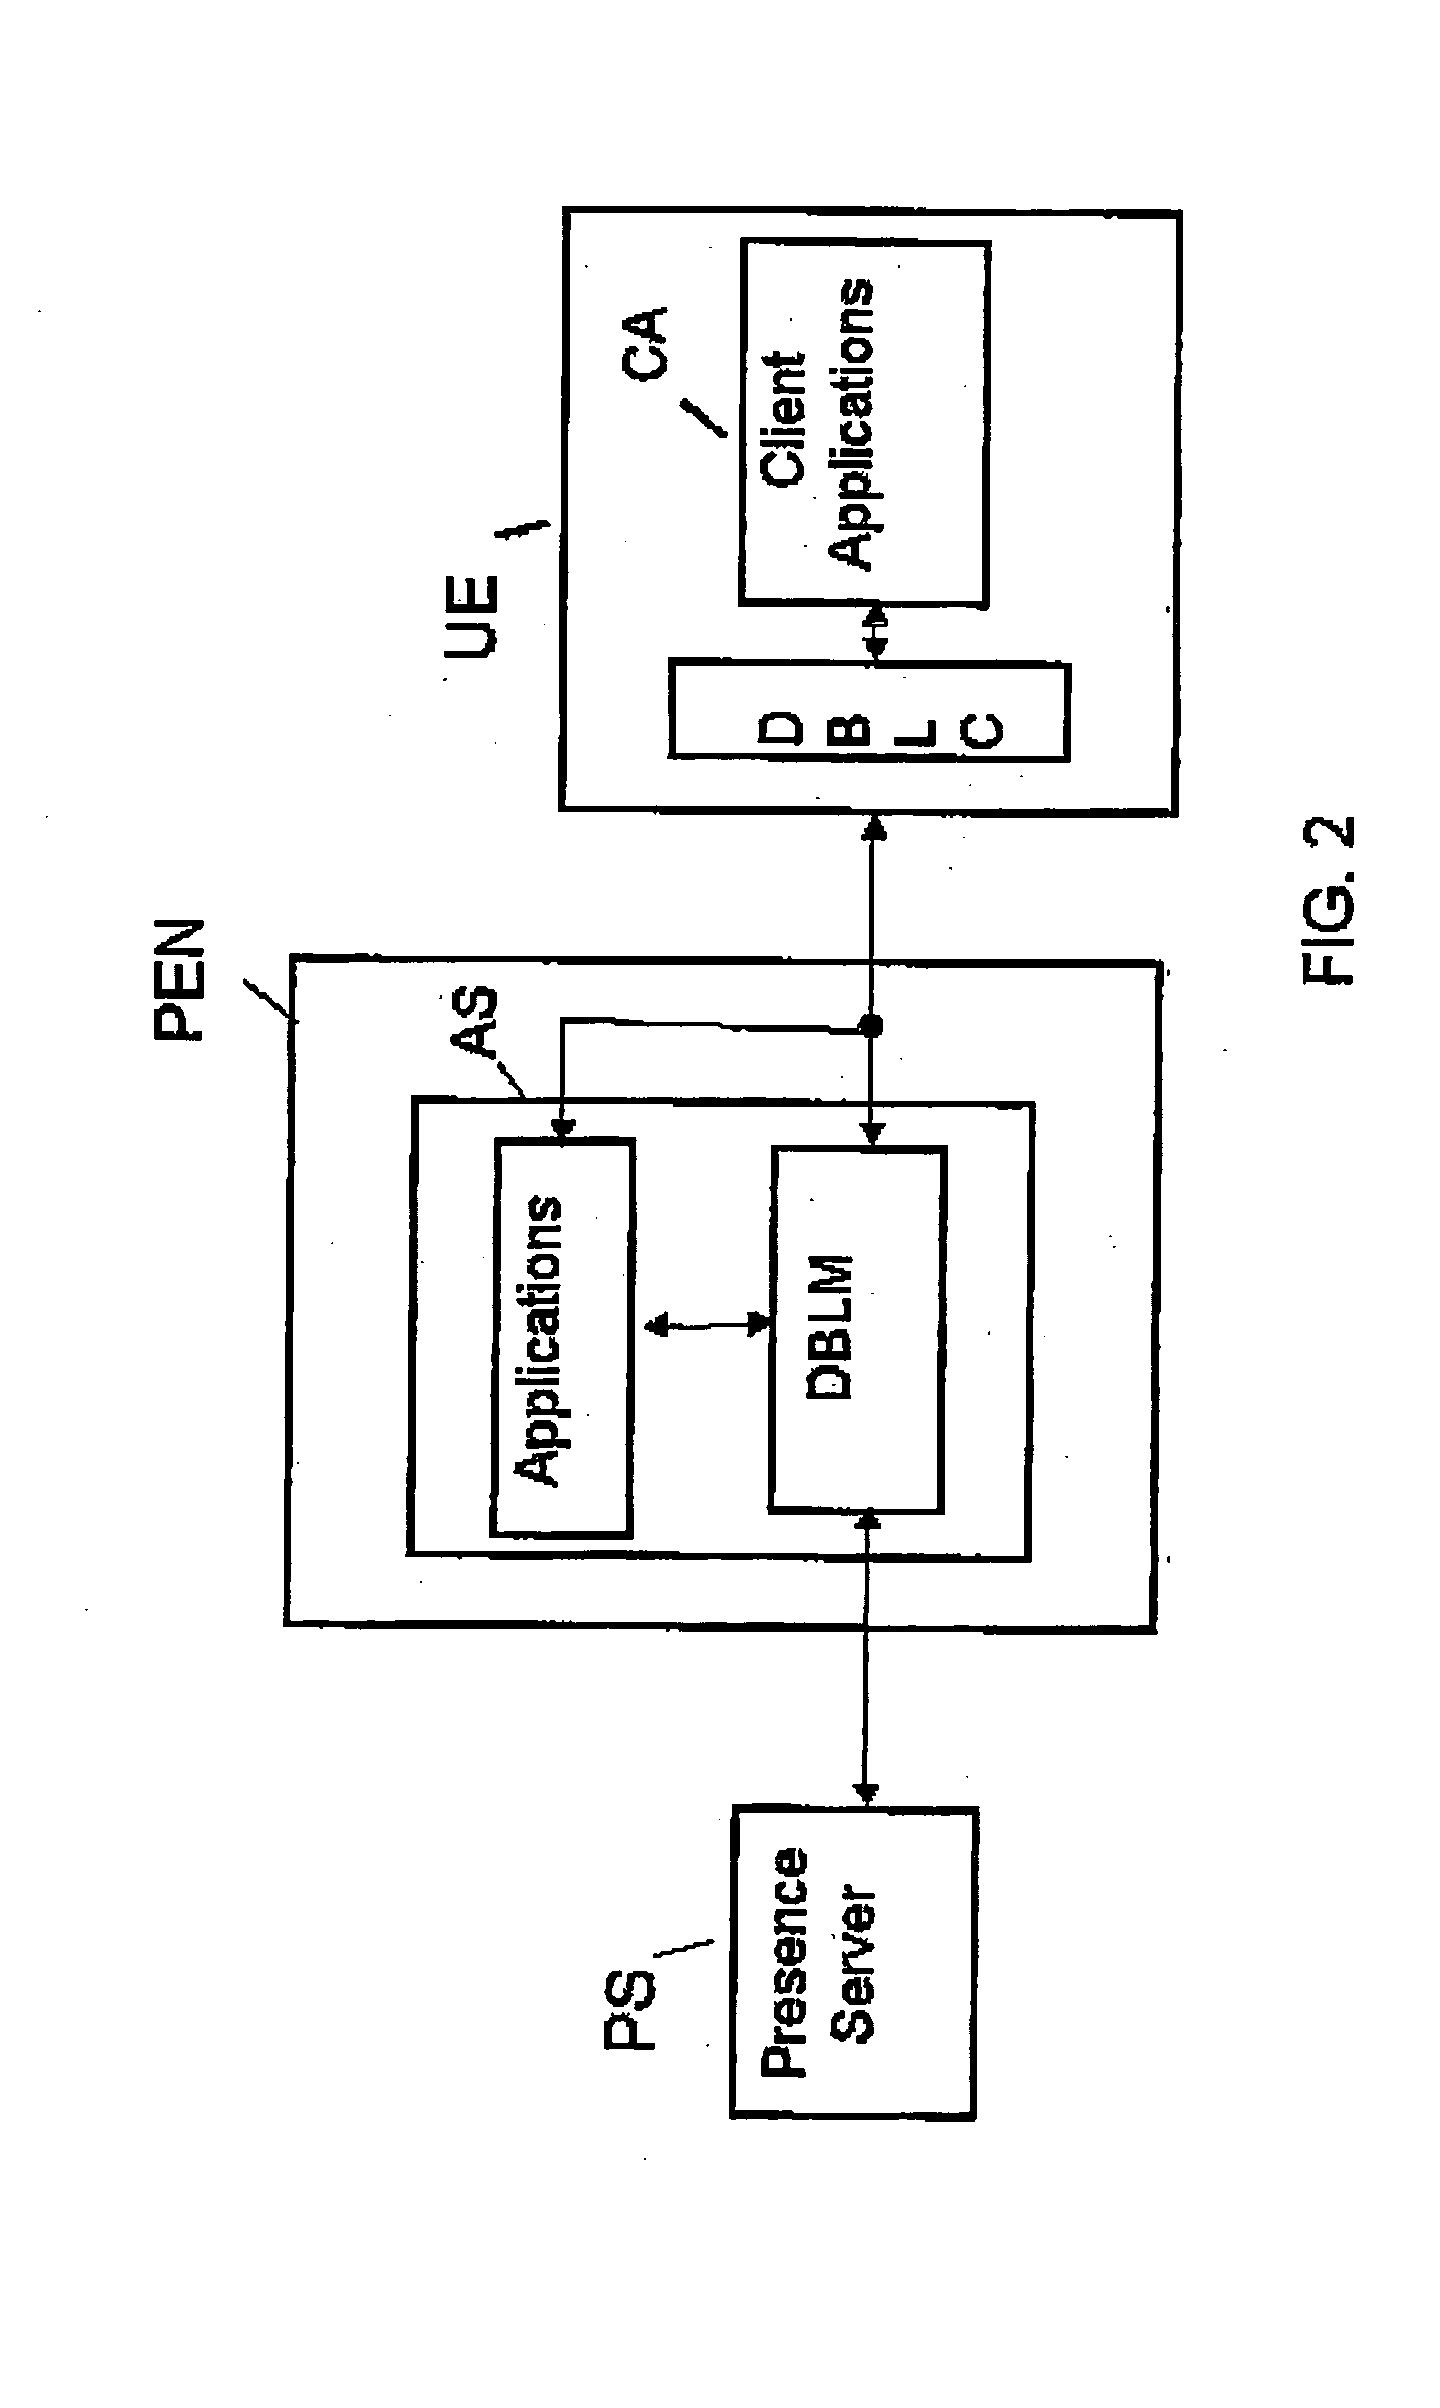 Method of and apparatus for server-side management of buddy lists in presence based services provided by a communication system